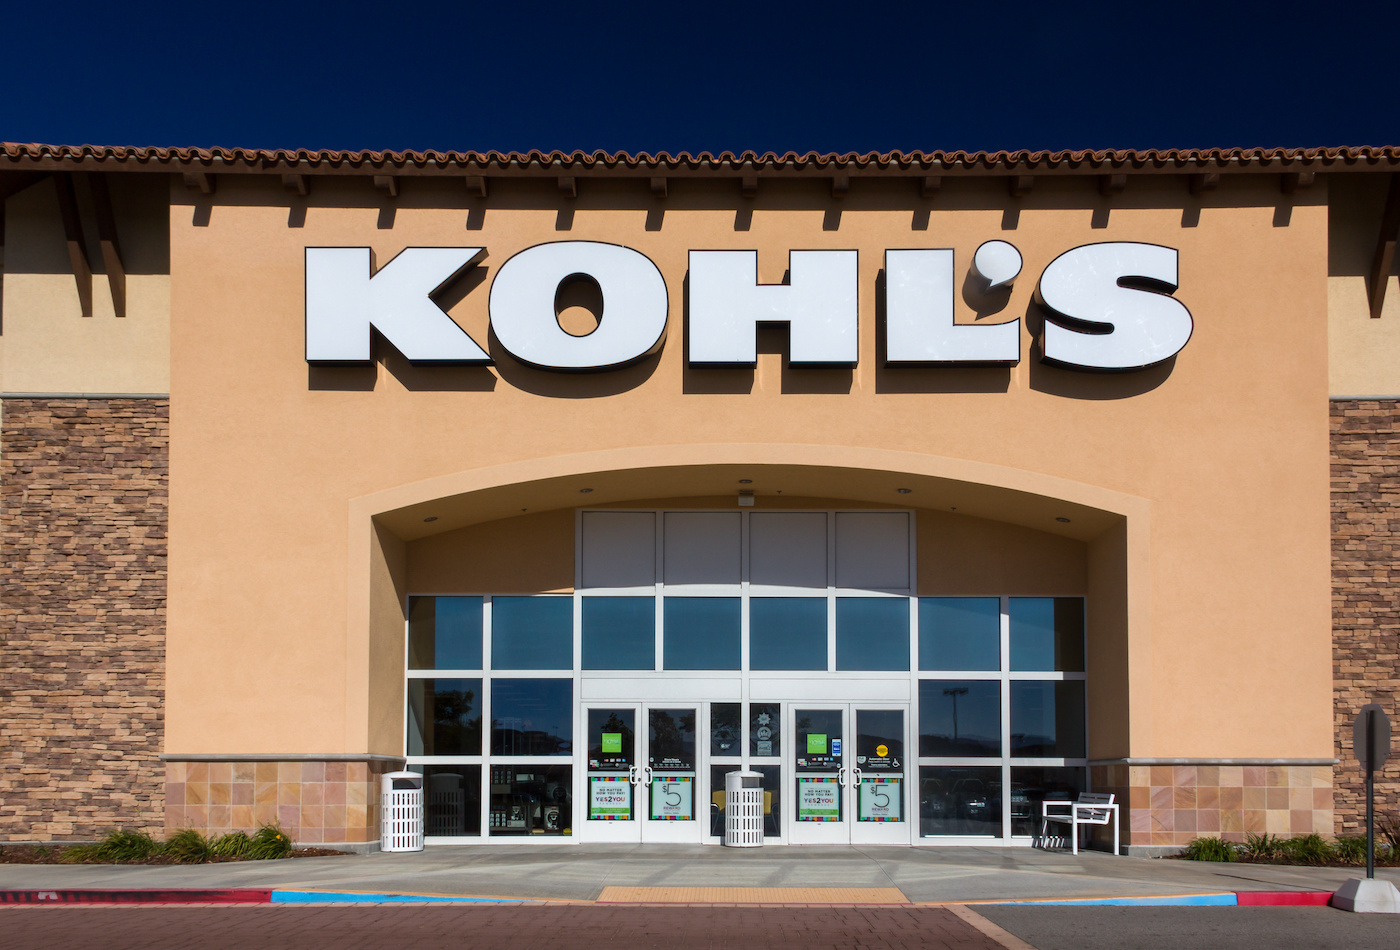 One Year After the Meme Stock Mania, Kohl’s (KSS) Reminds Us Where the Power Still Lies